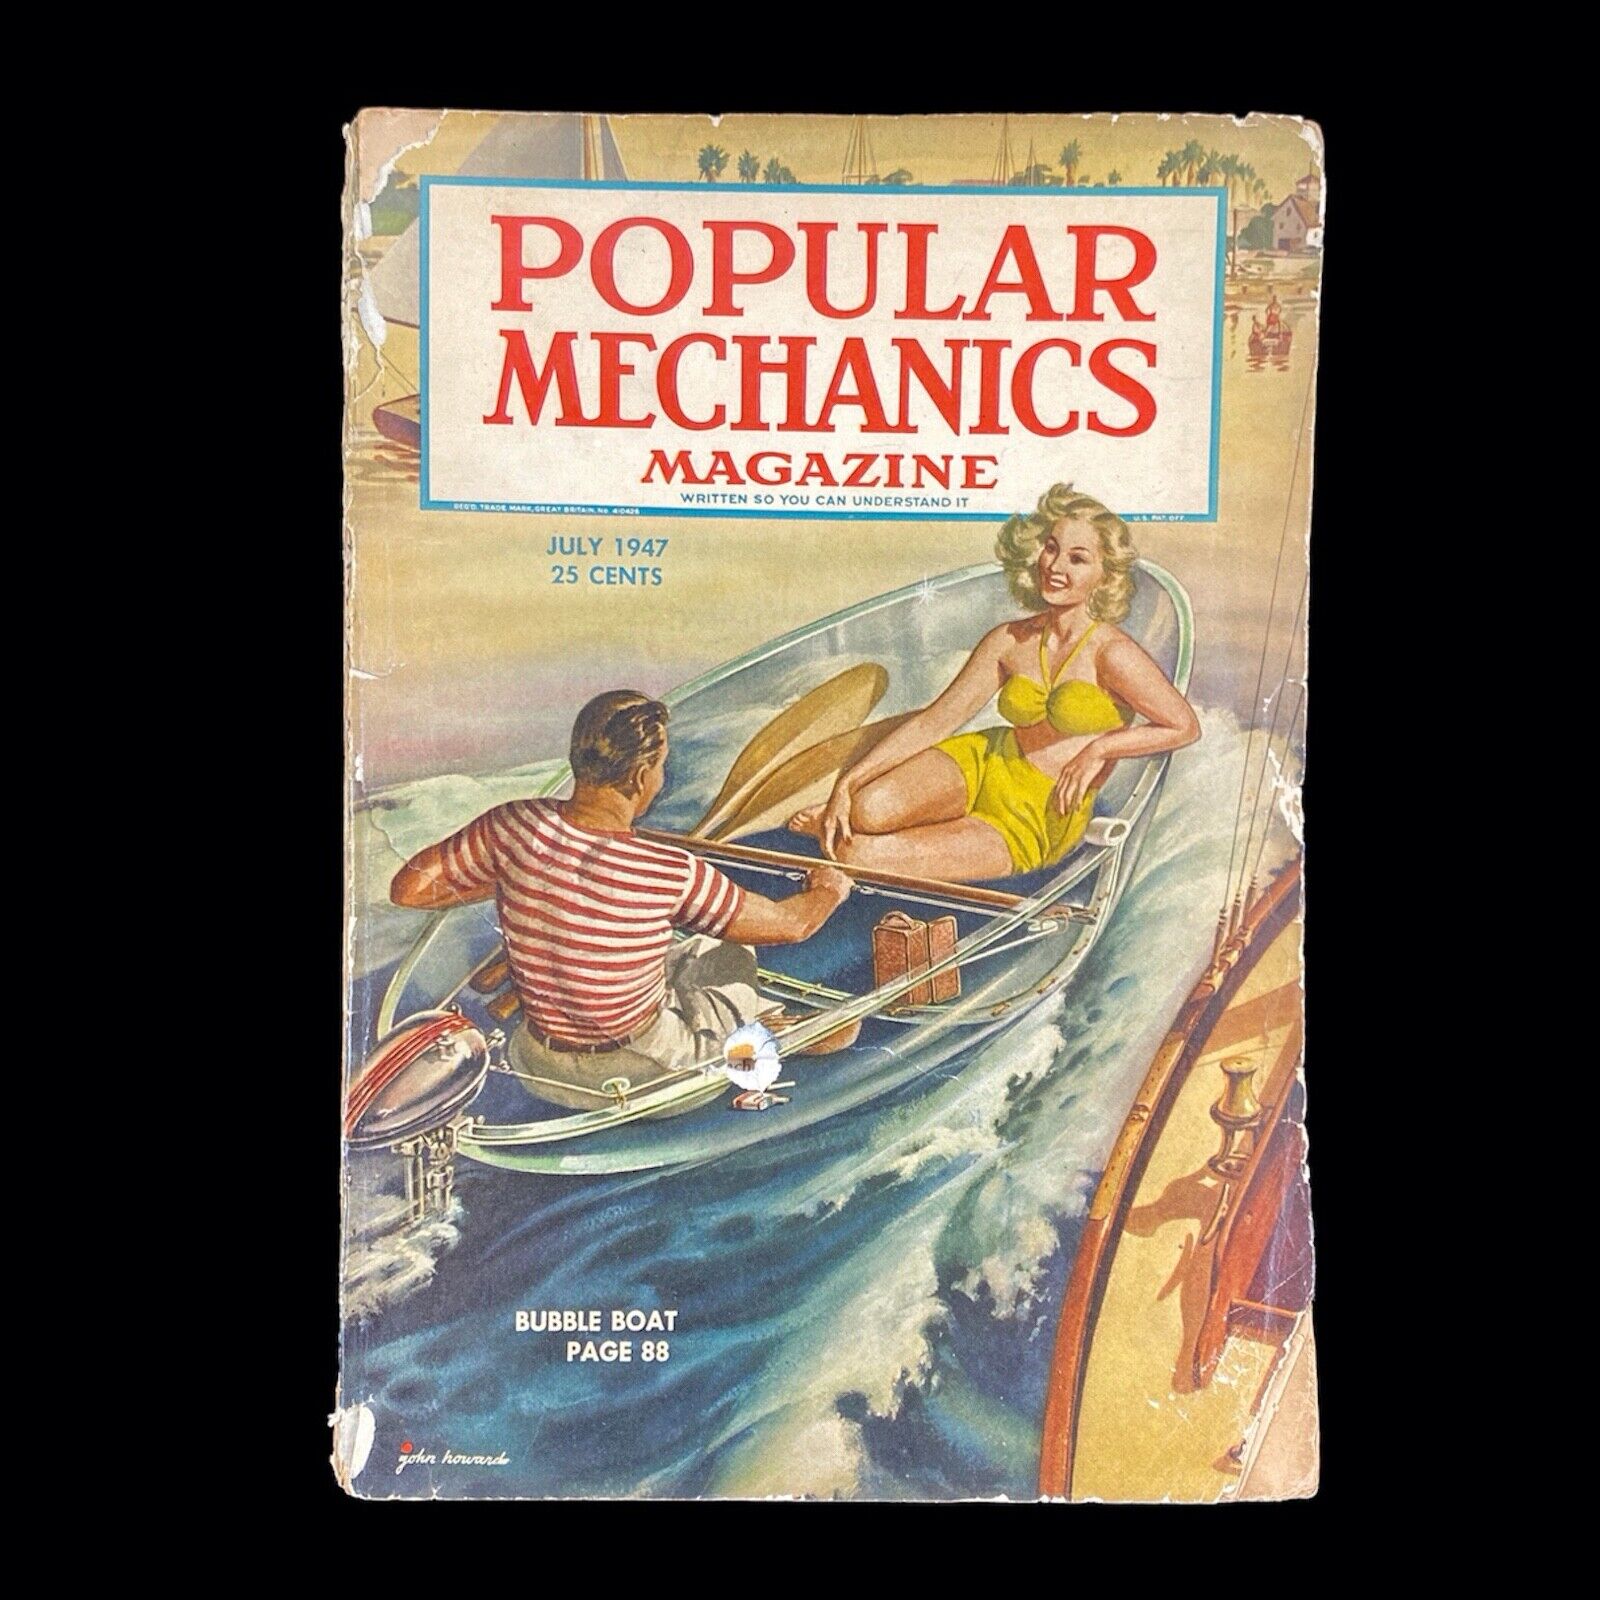 Popular Mechanics Magazine, July 1947. Vintage advertising illustrated by John C Howard. Couple on a clear bubble boat.